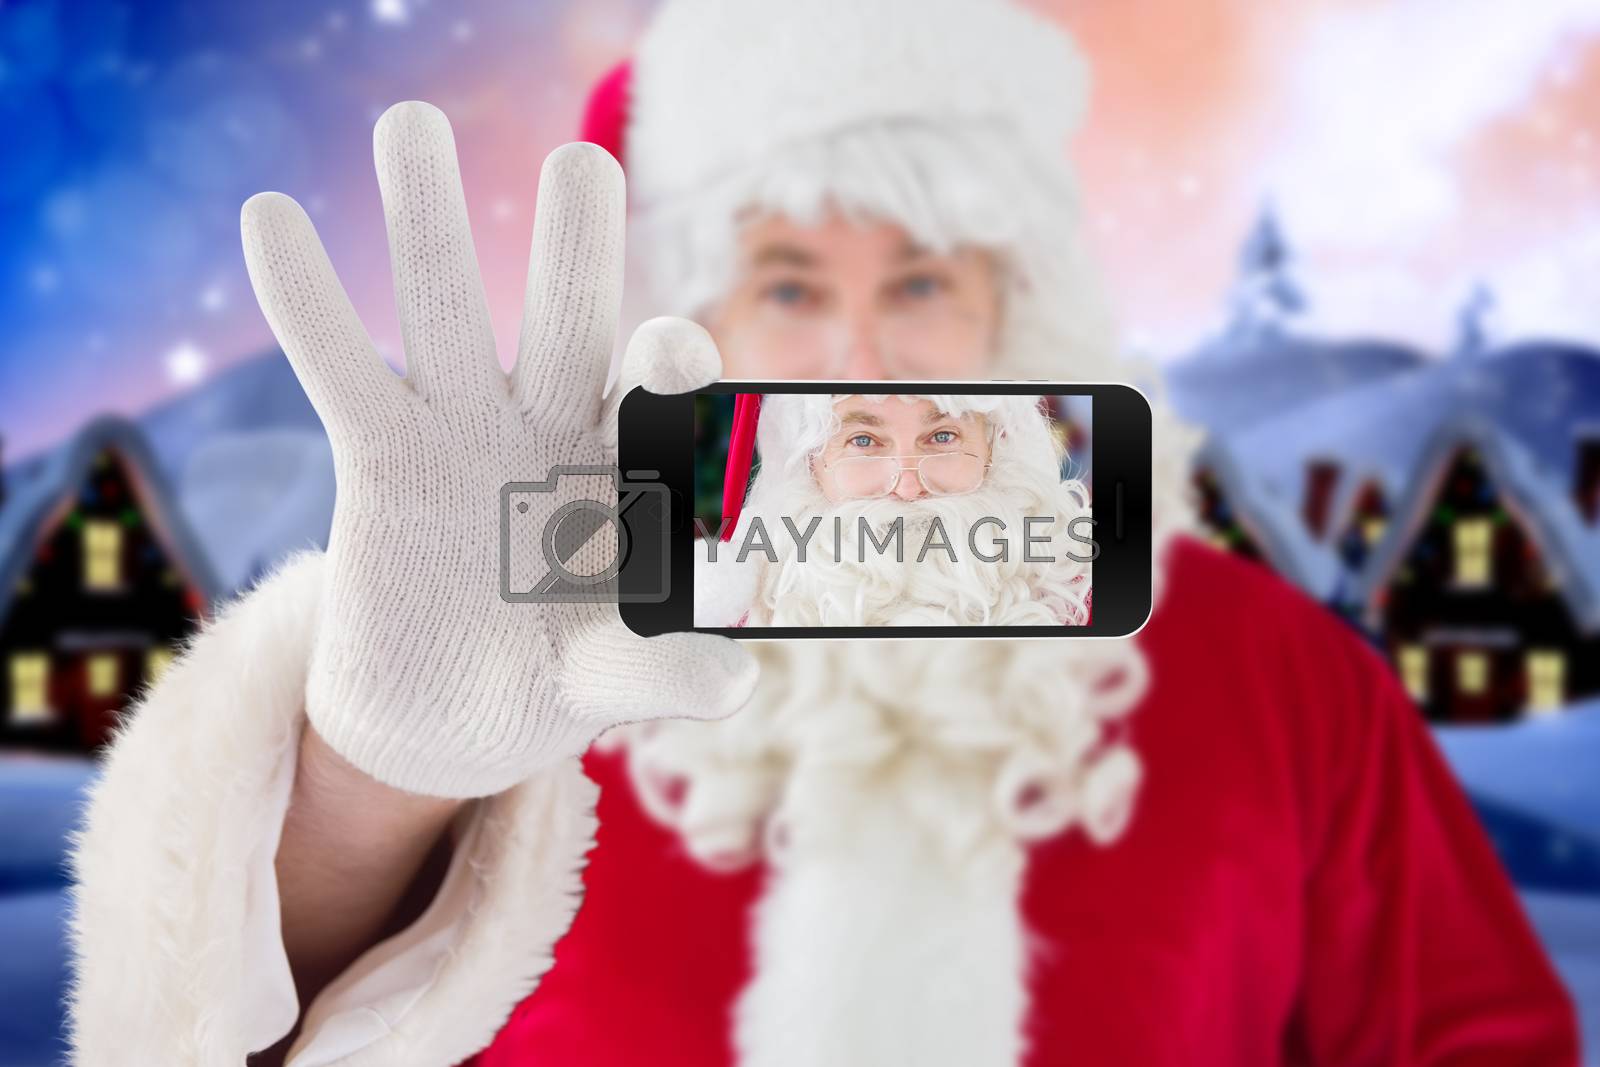 Royalty free image of Composite image of hand holding mobile phone by Wavebreakmedia